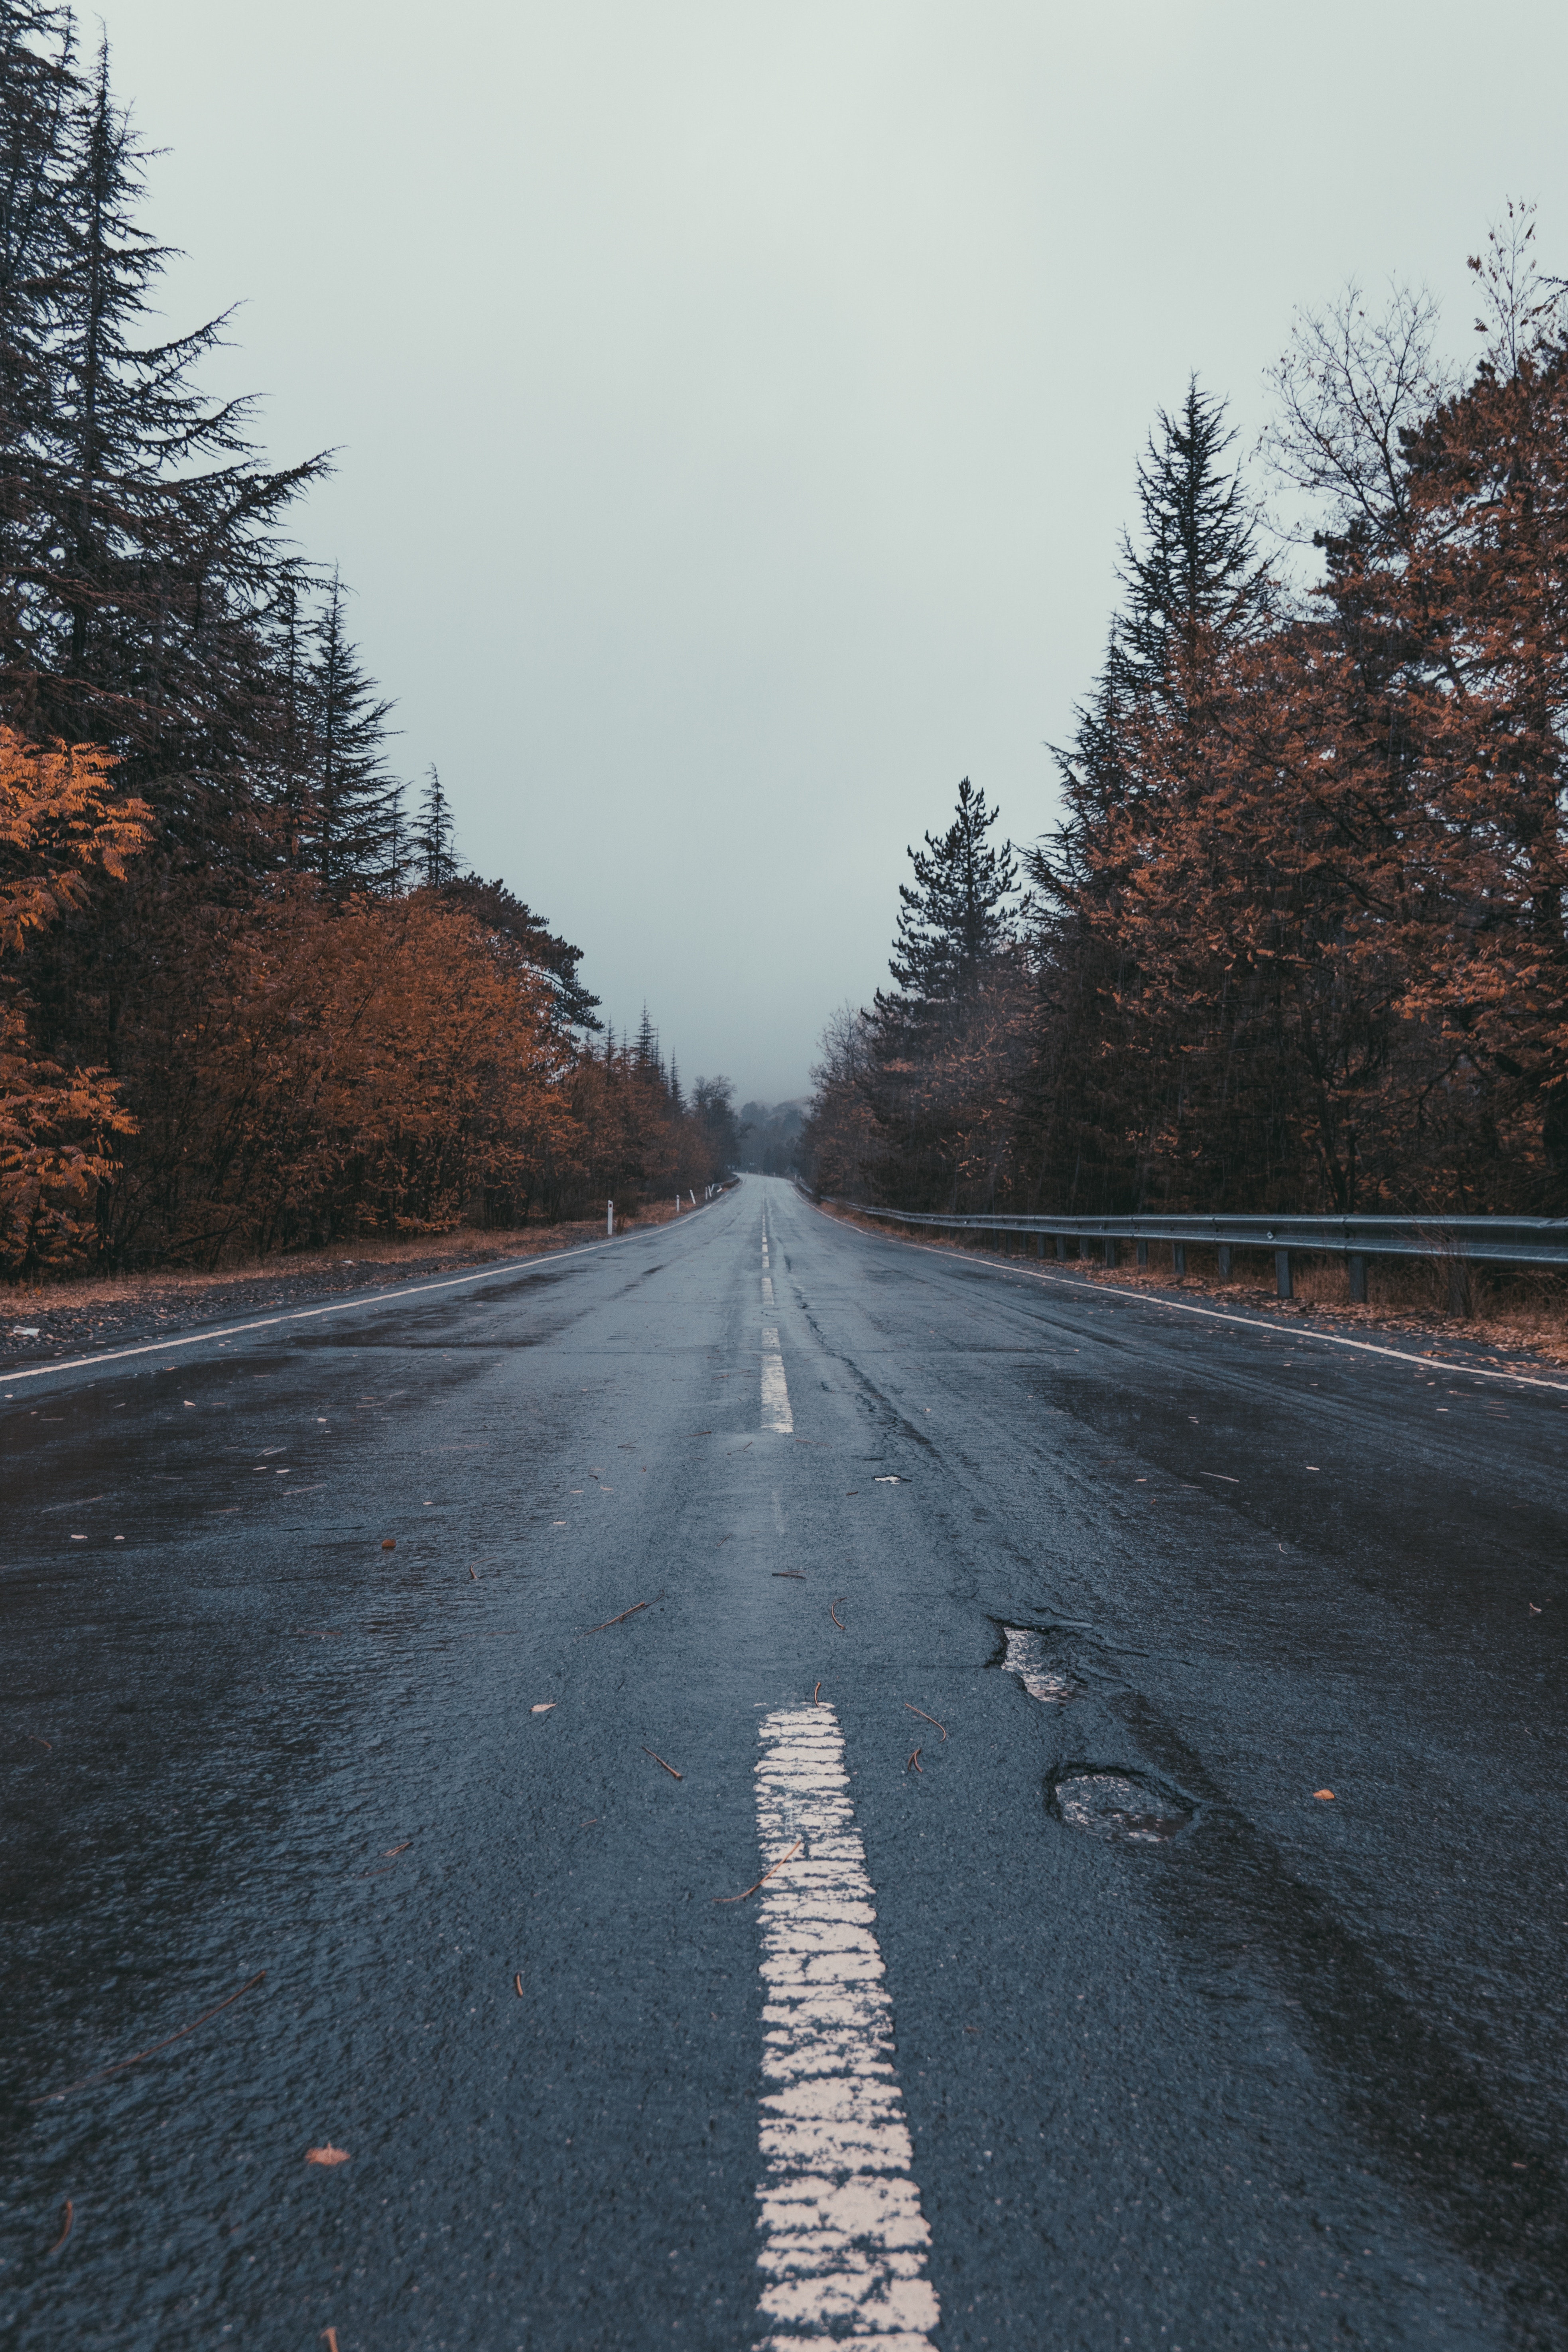 mainly cloudy, nature, trees, road, markup, overcast